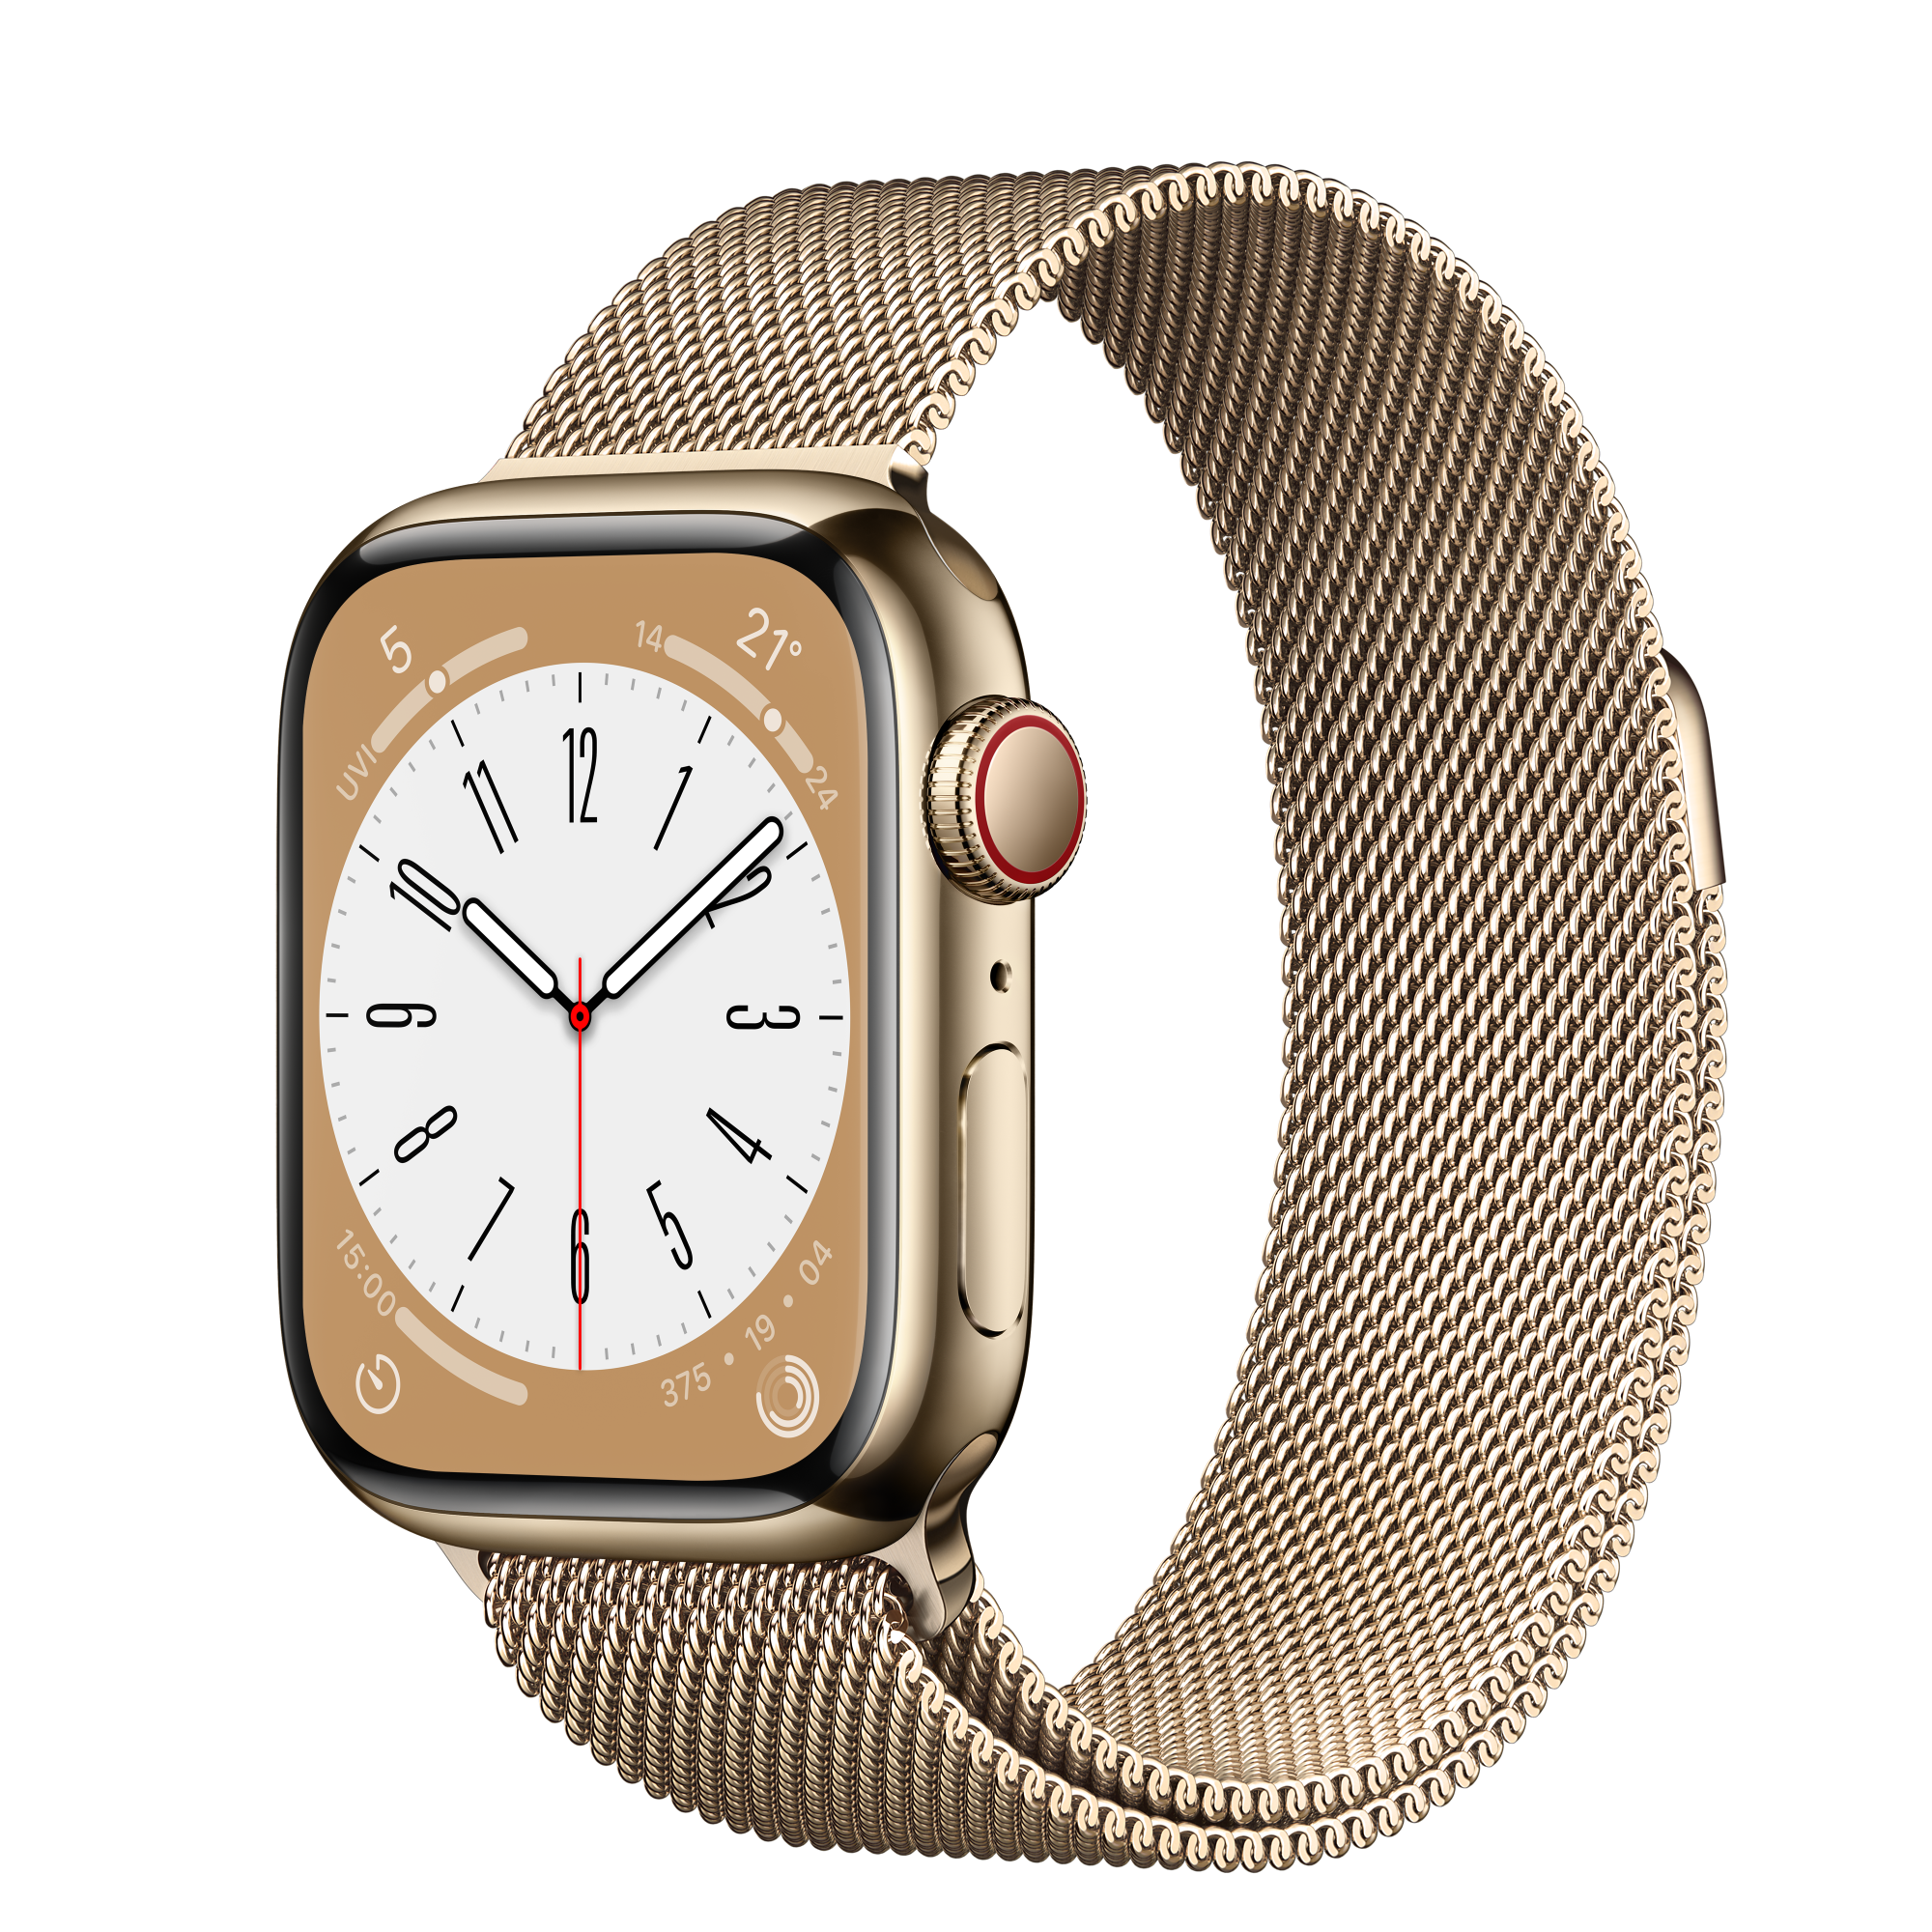 Apple Watch PNG Image File